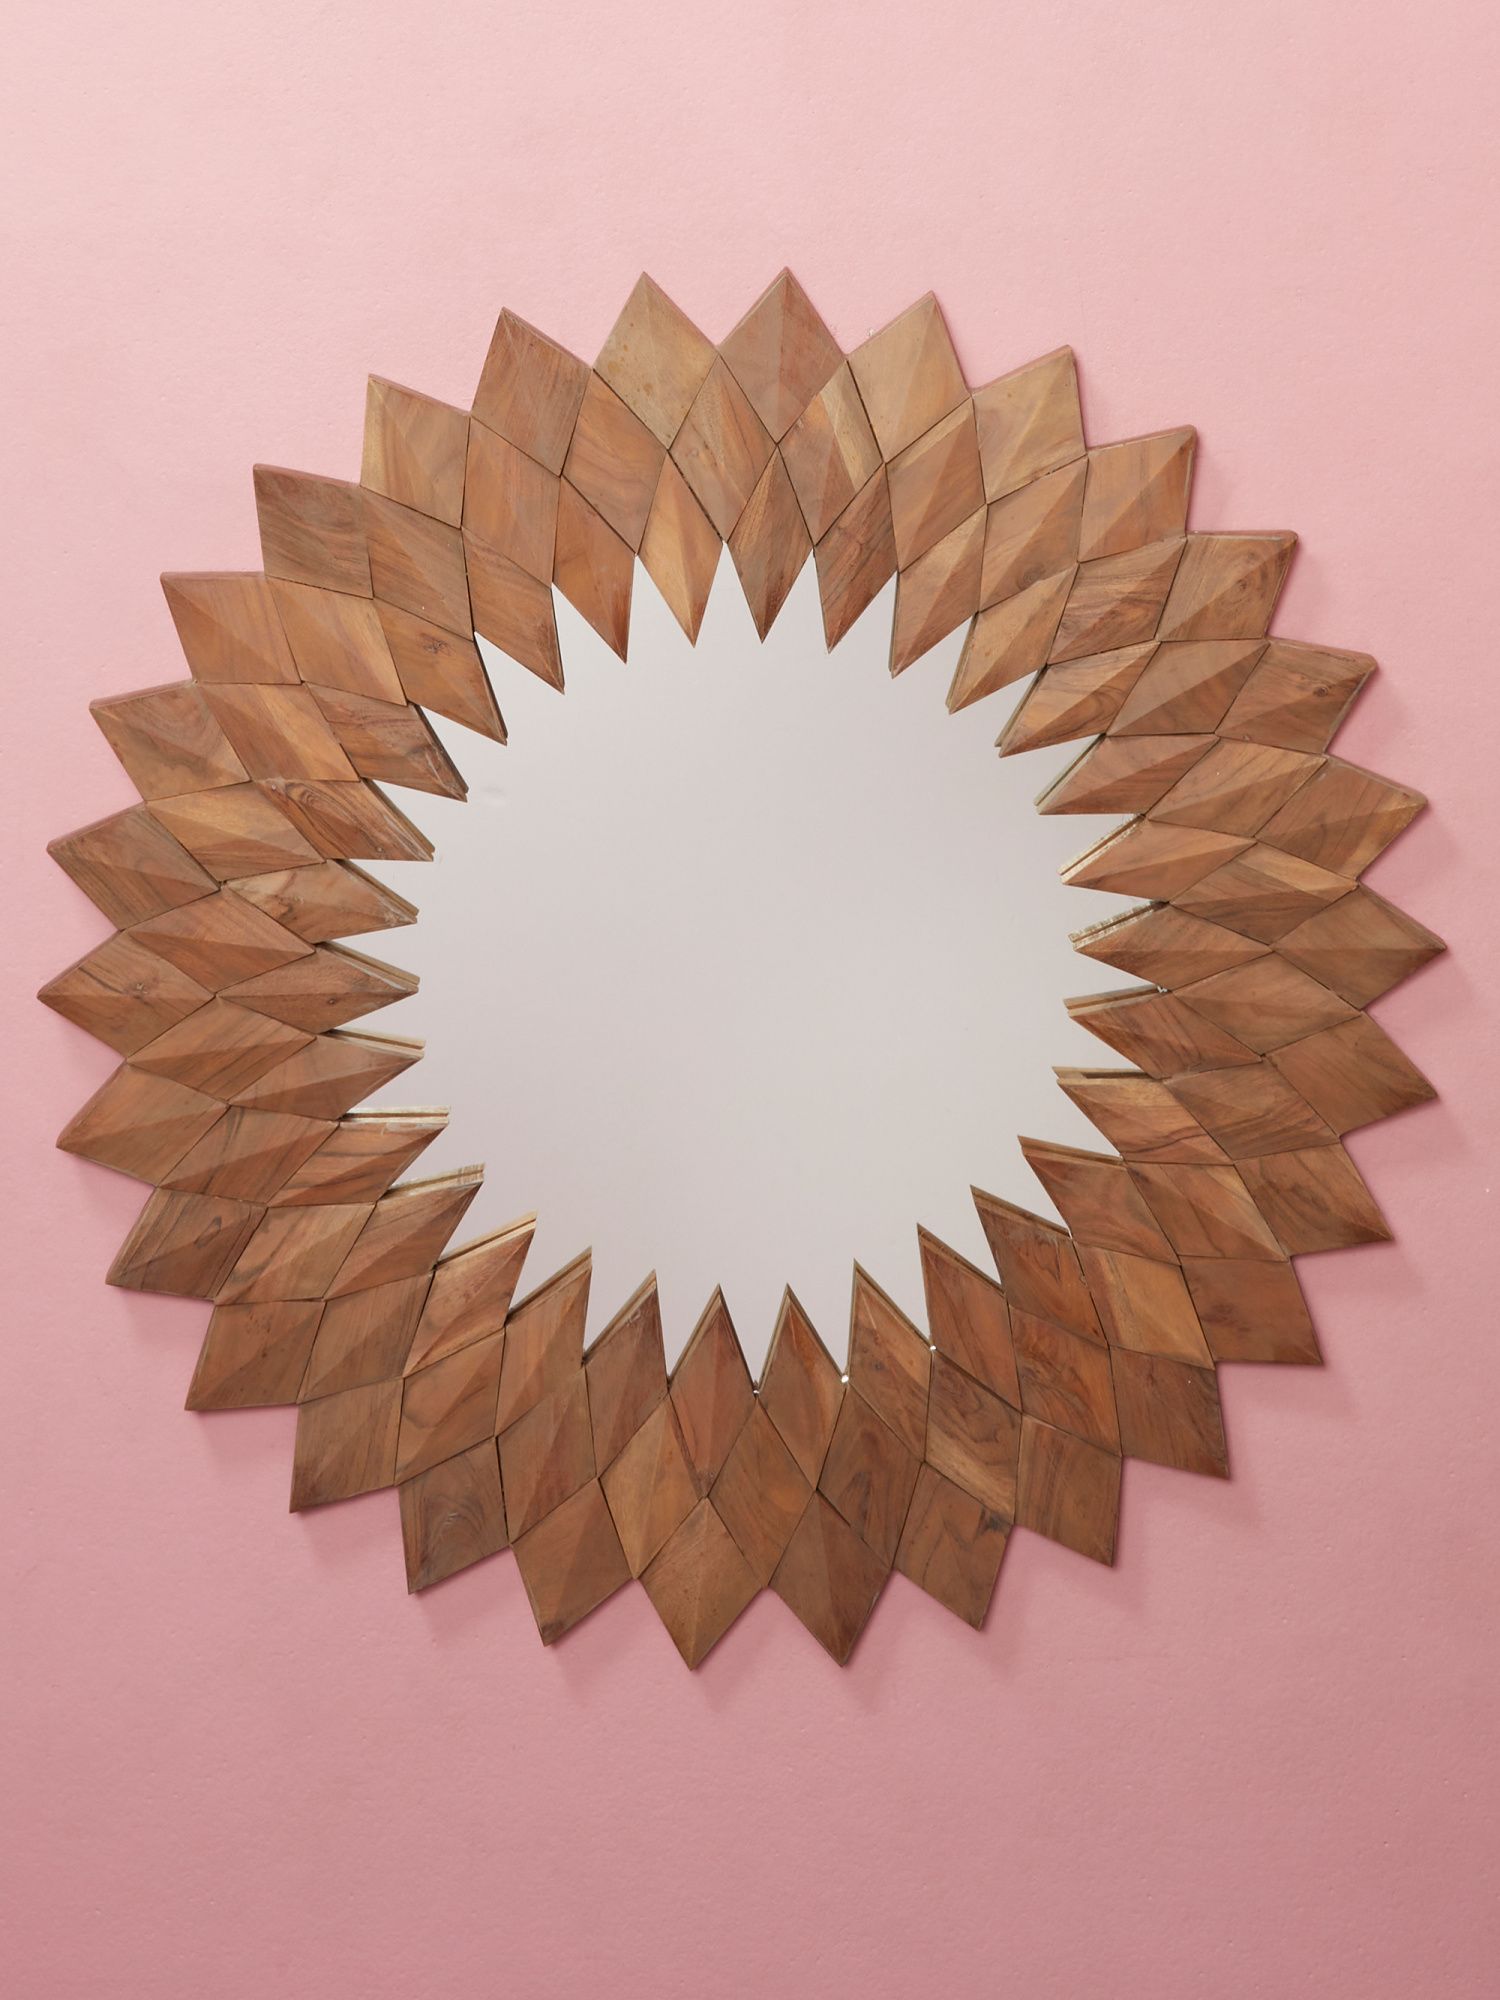 44in Wood Intricate Pieced Wall Mirror | Made In India | HomeGoods | HomeGoods